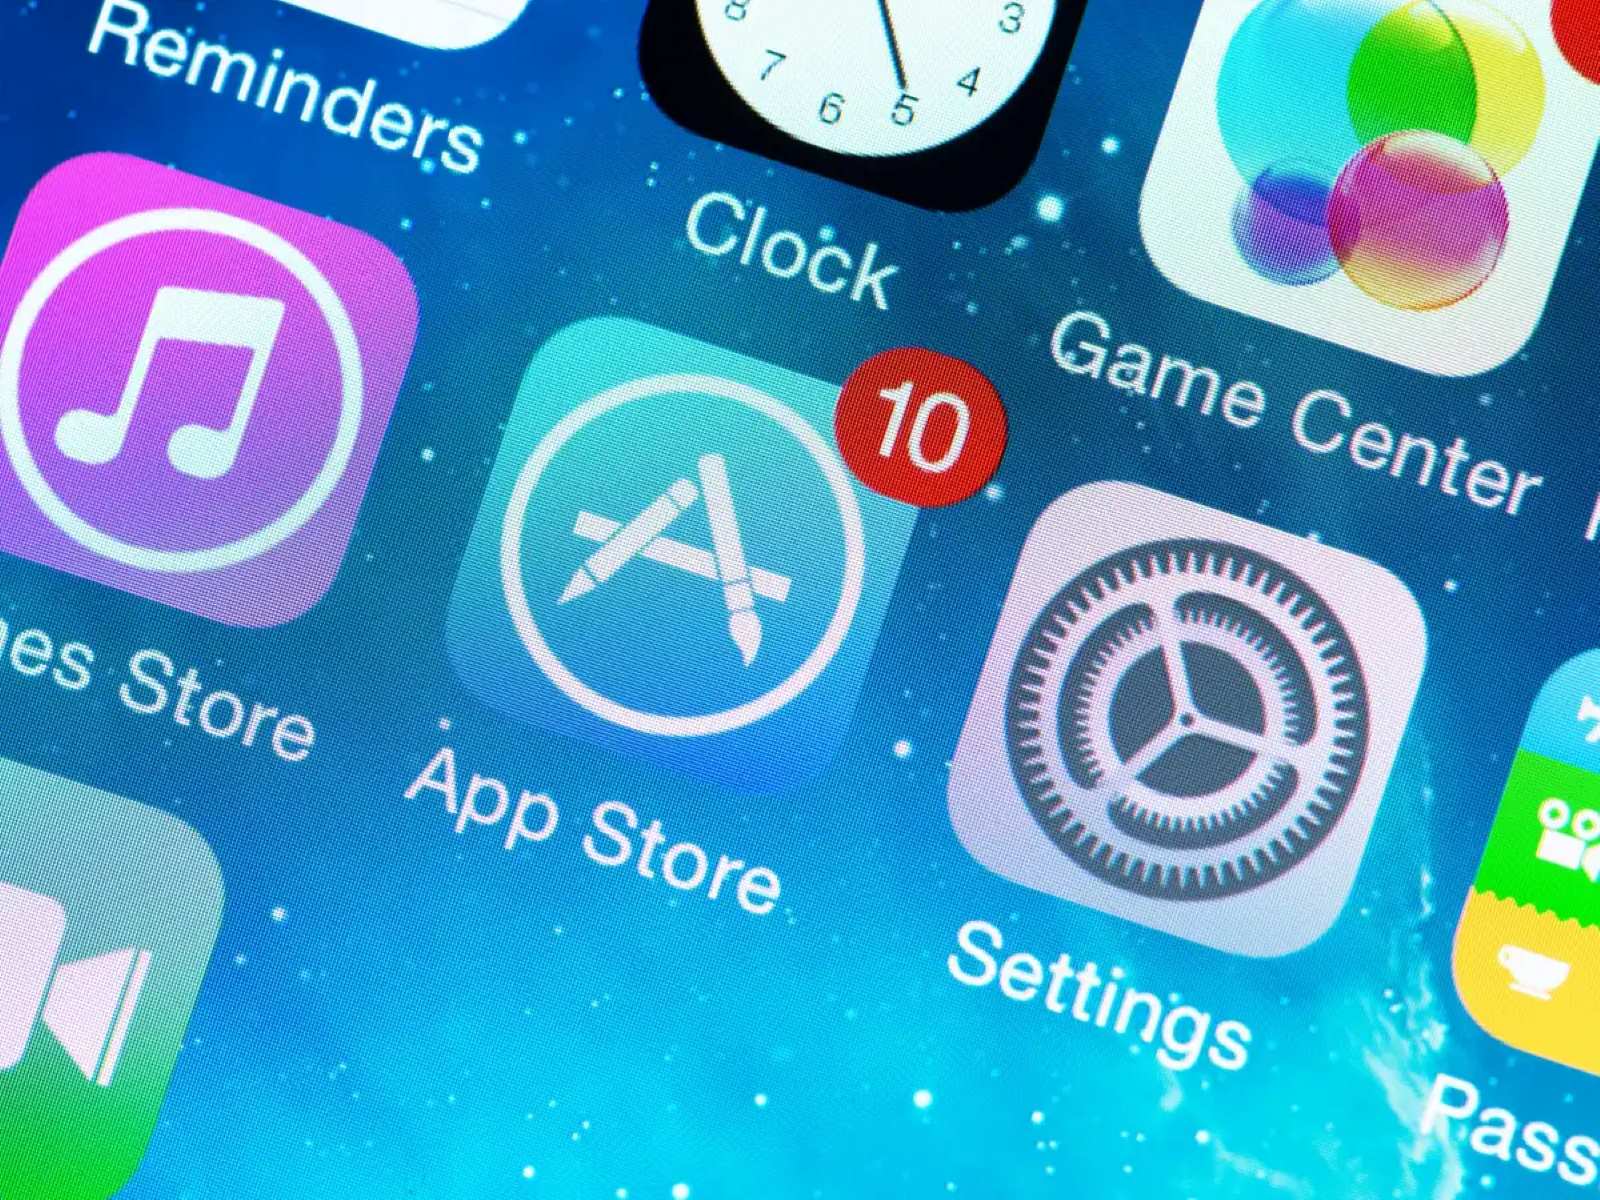 How To Use App Store Without Credit Card